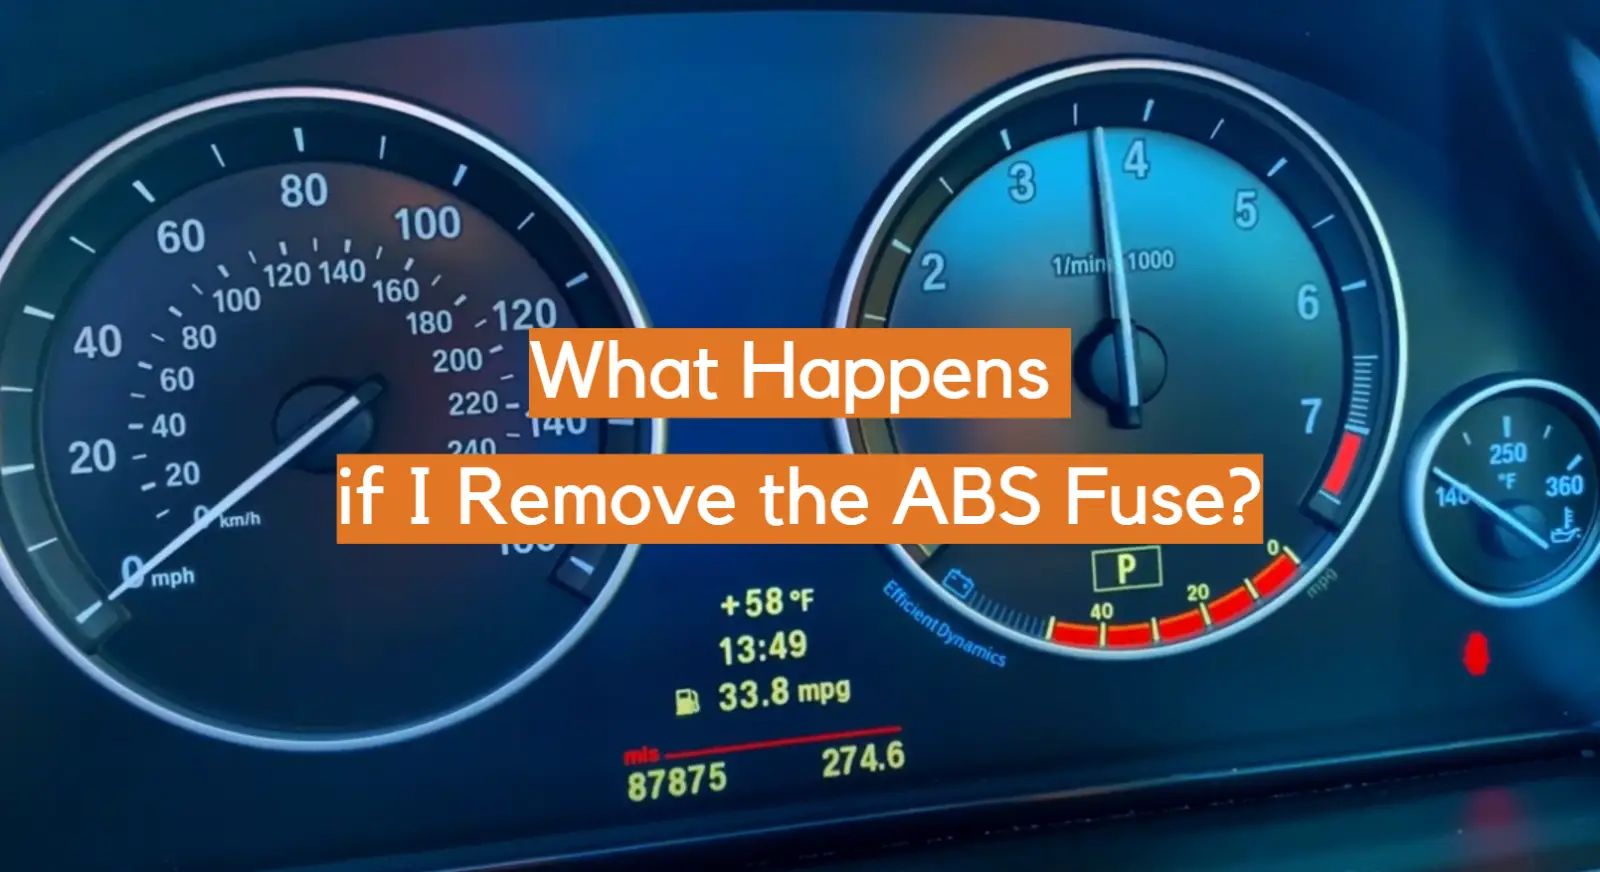 What Happens if I Remove the ABS Fuse?